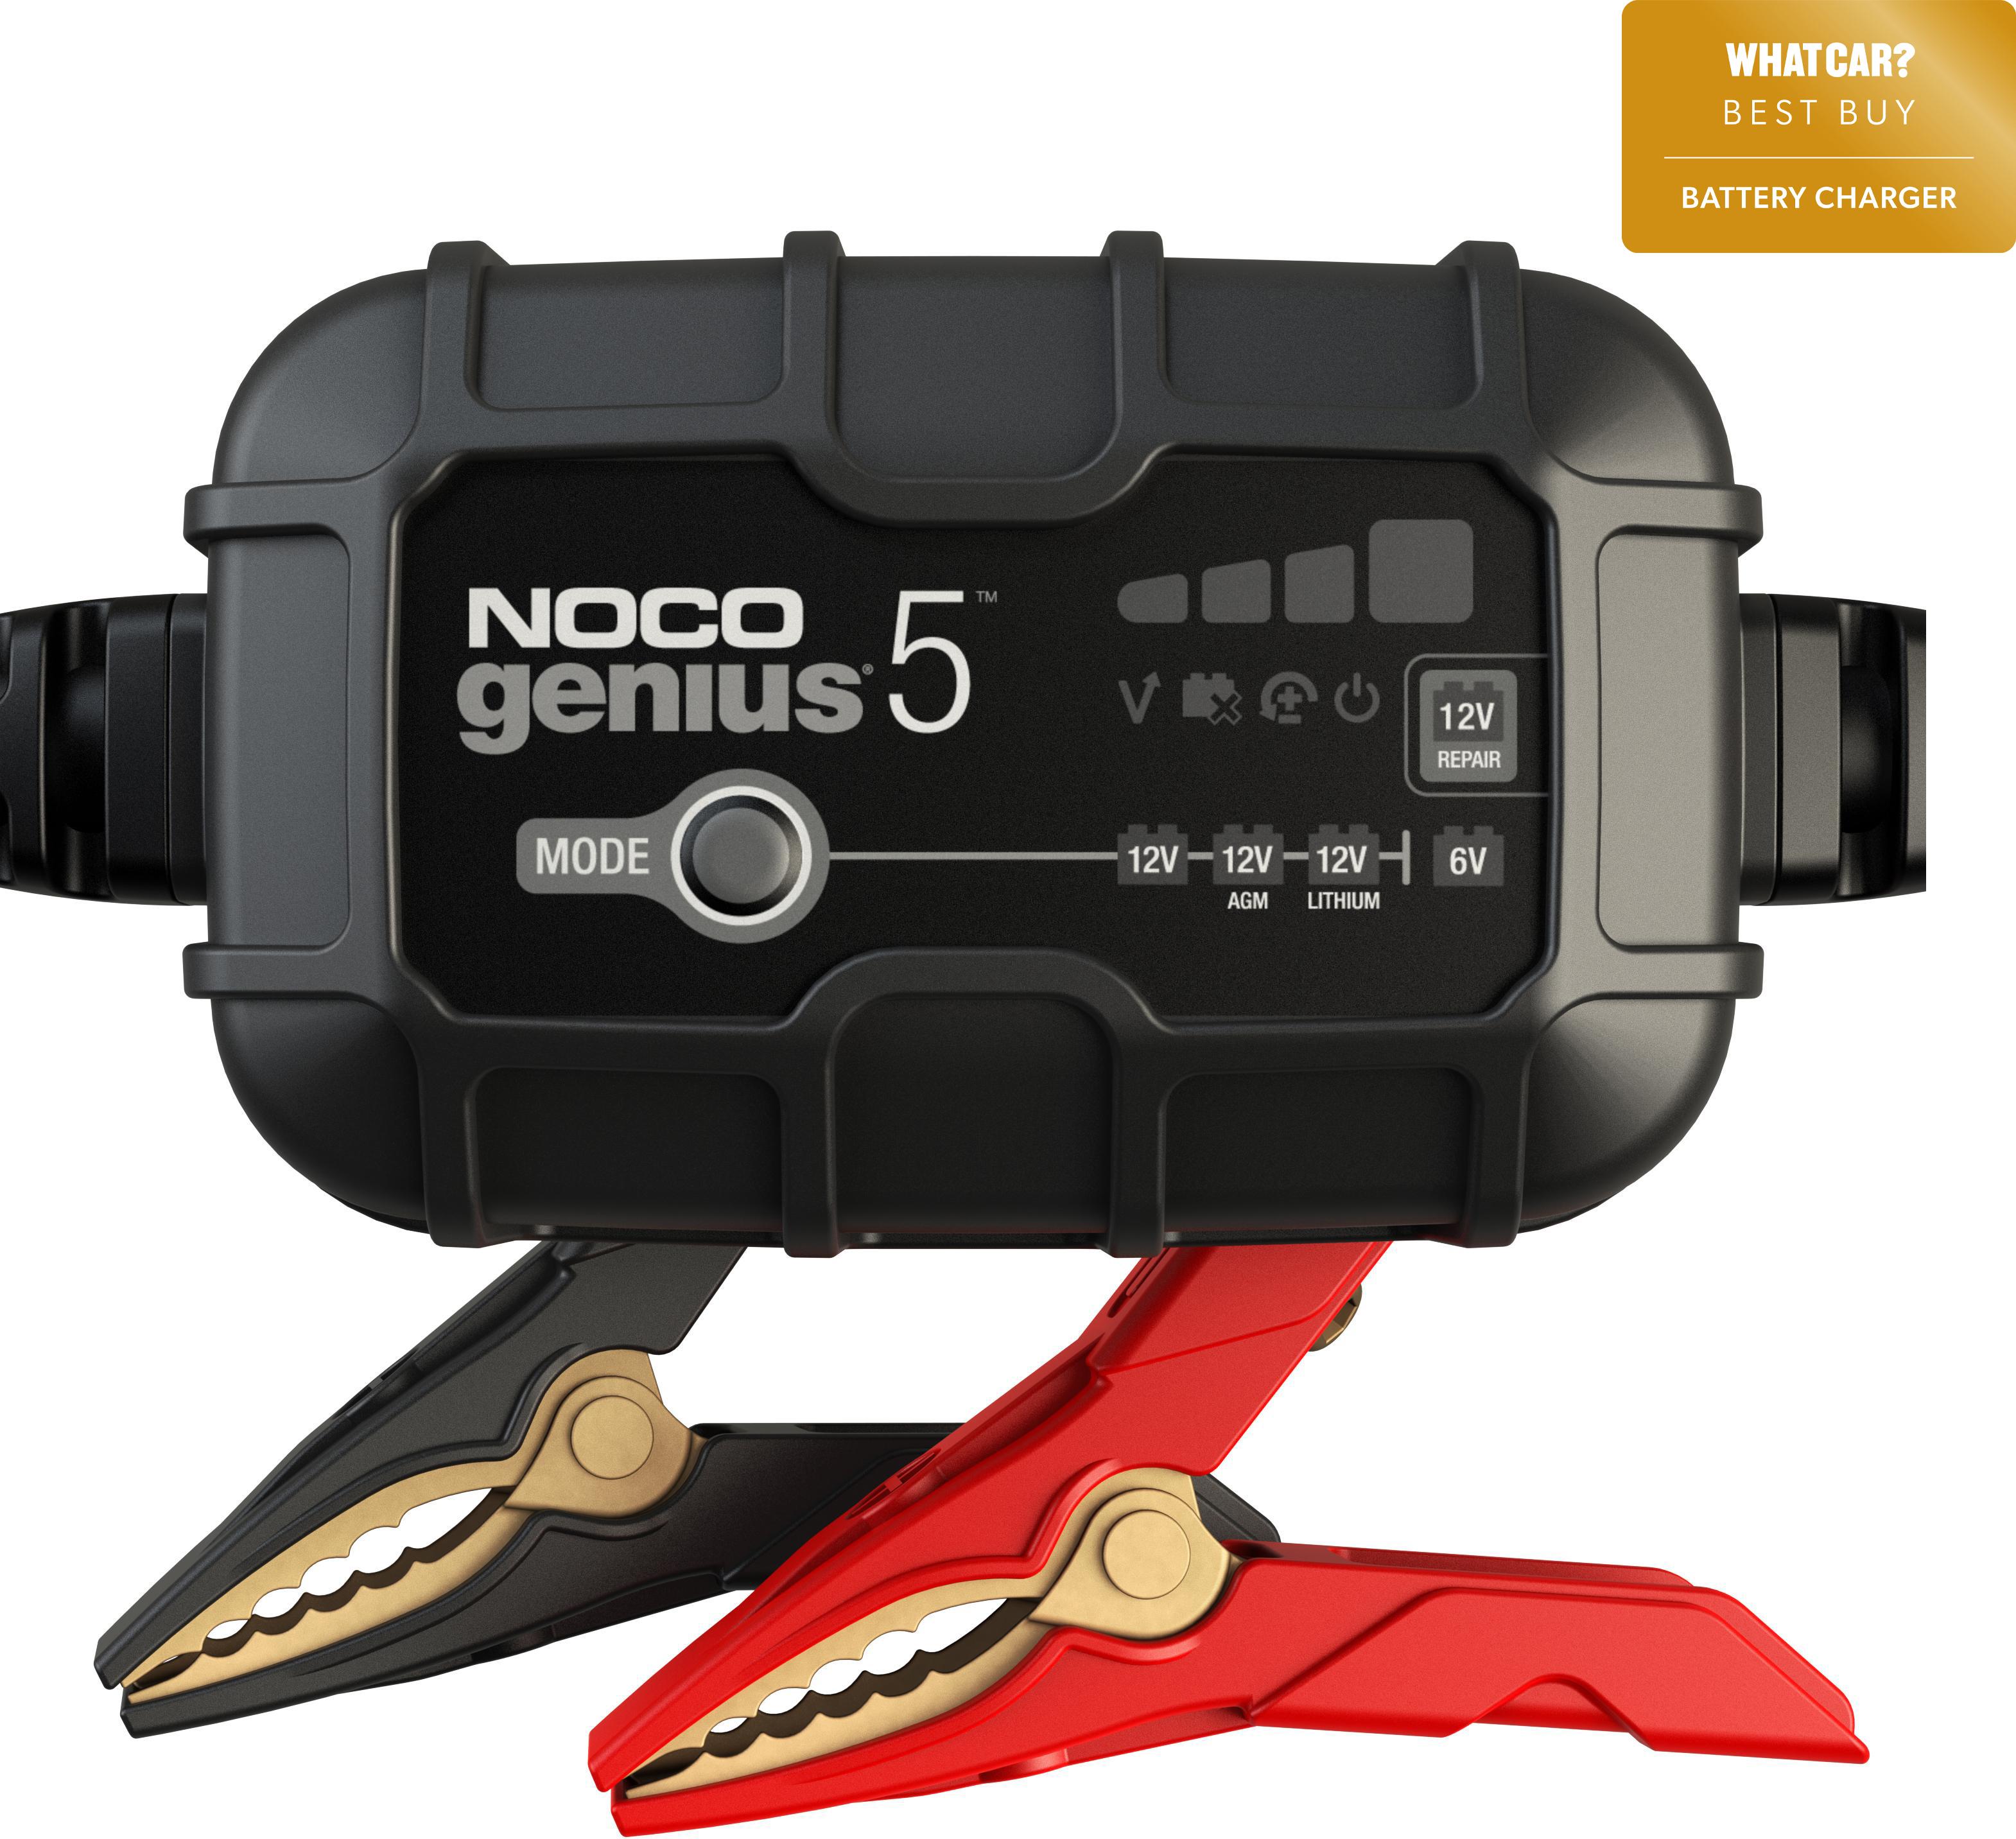 Noco Genius5 5-Amp Battery Charger